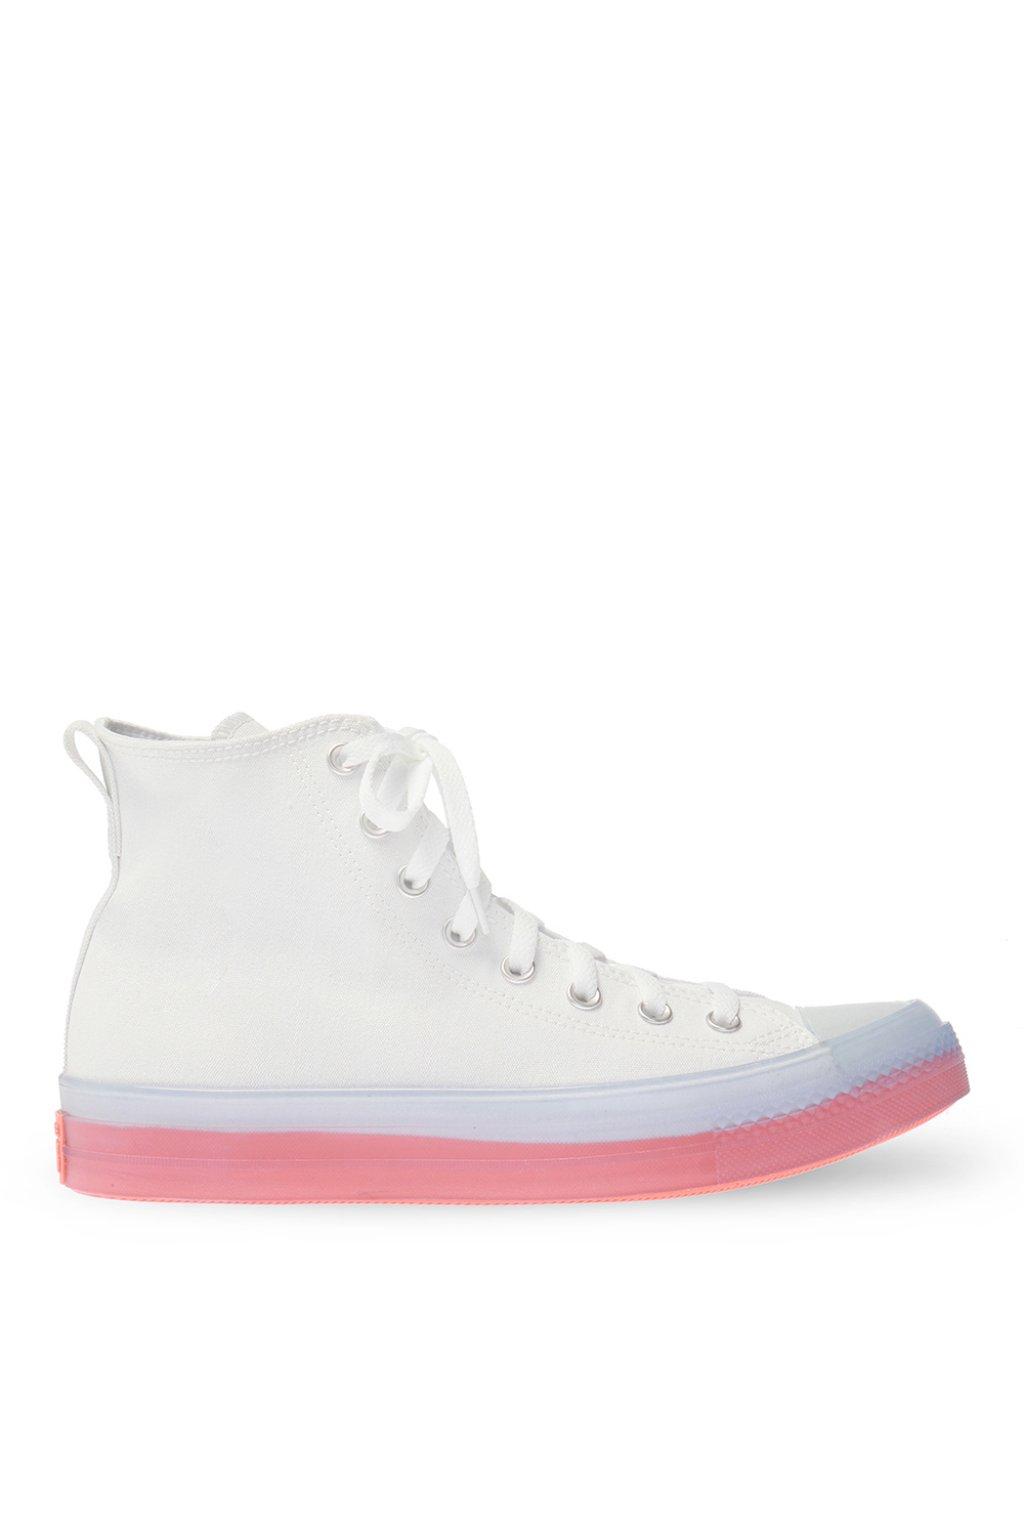 Converse Chuck Taylor All Star Cx Low Top in White - Save 26% - Lyst